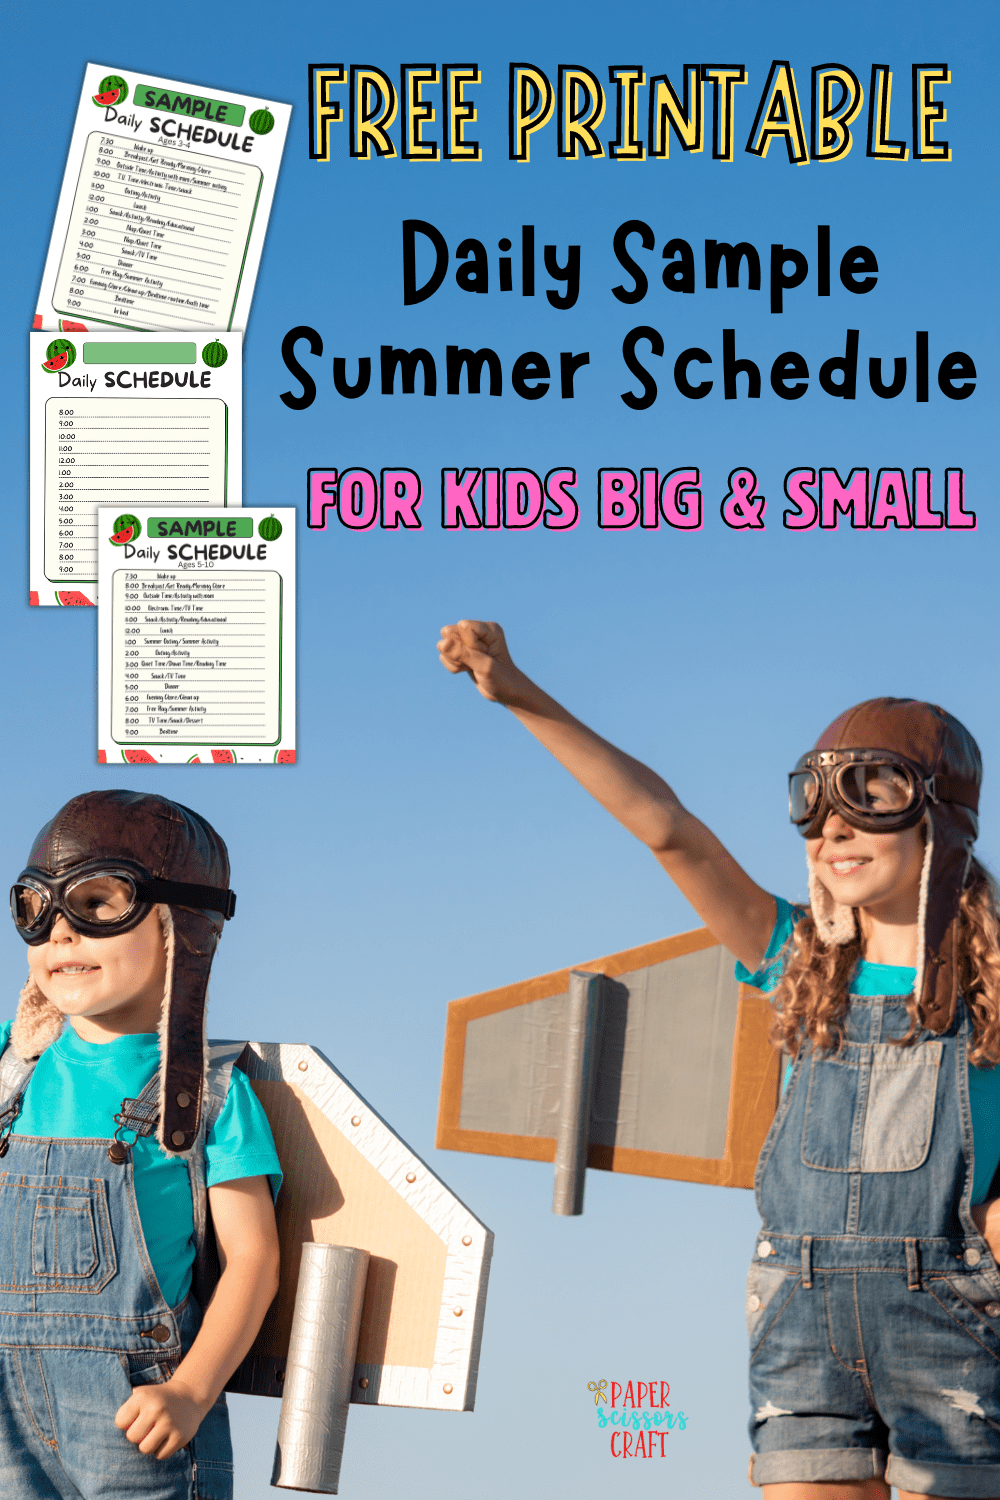 Free printable daily sample summer schedule for kids big & small Pinterest pin.